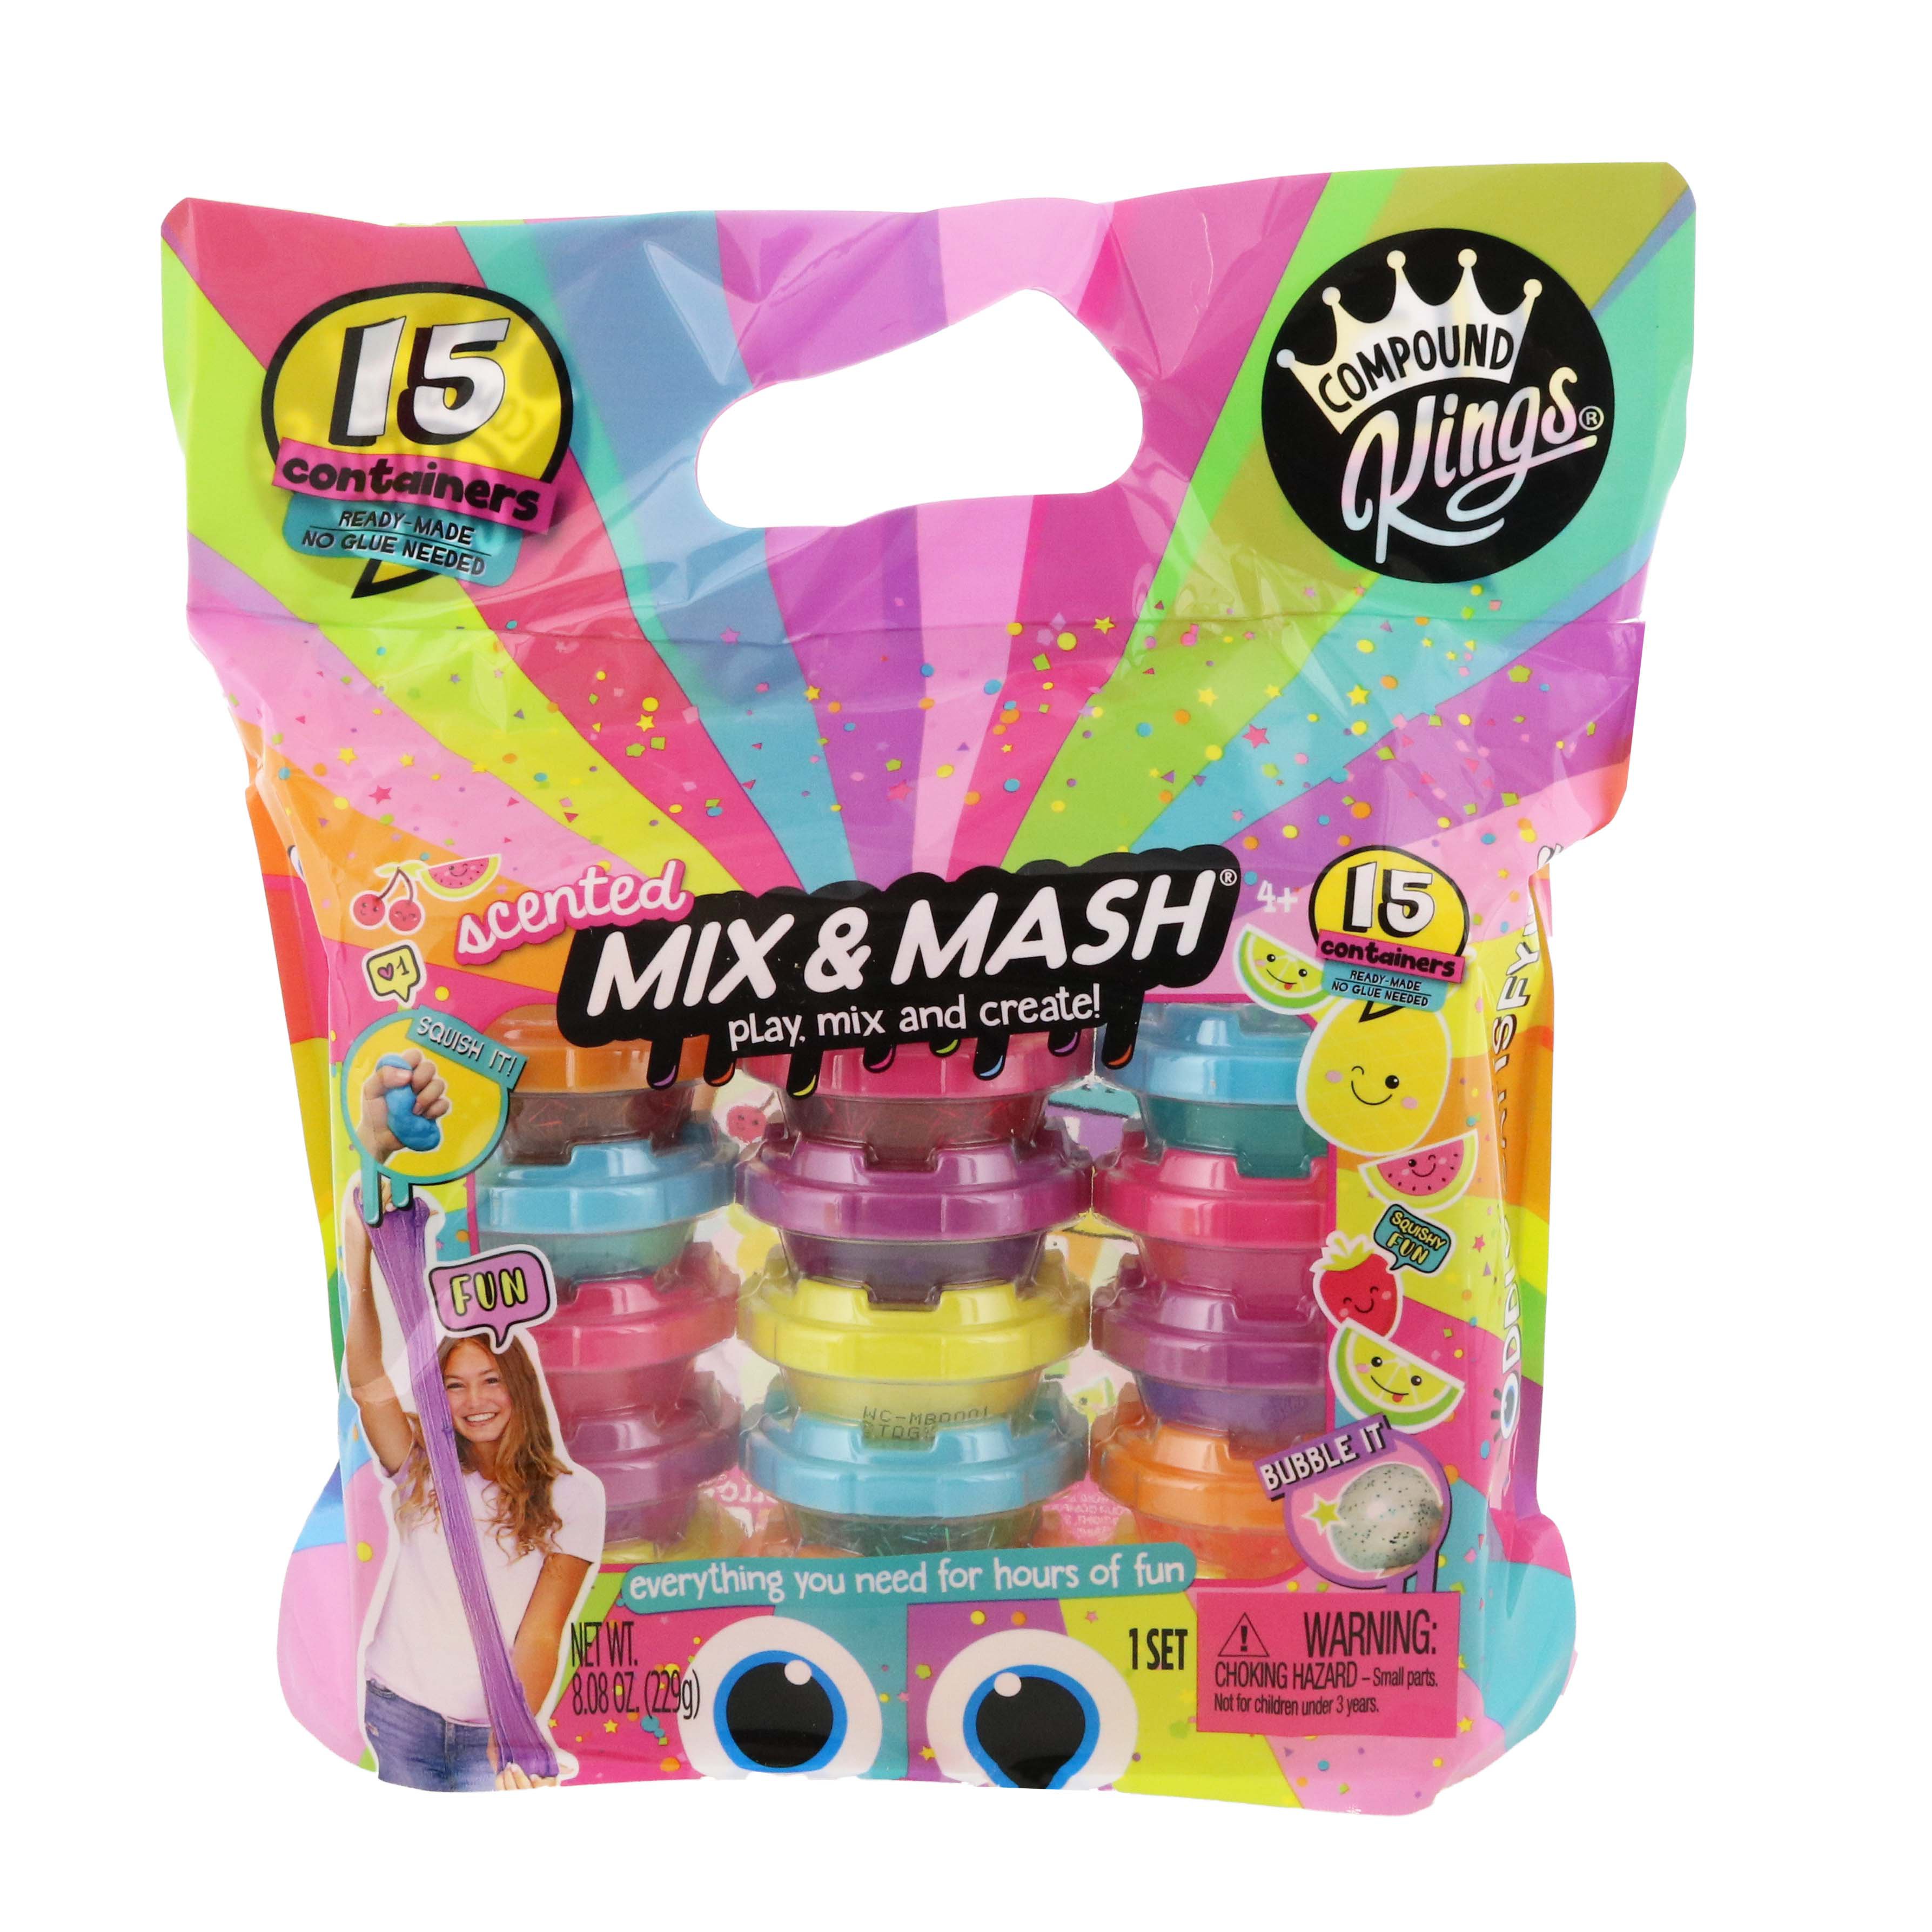 Compound Kings Mix & Mash Scented Slime Kit - Shop Slime at H-E-B